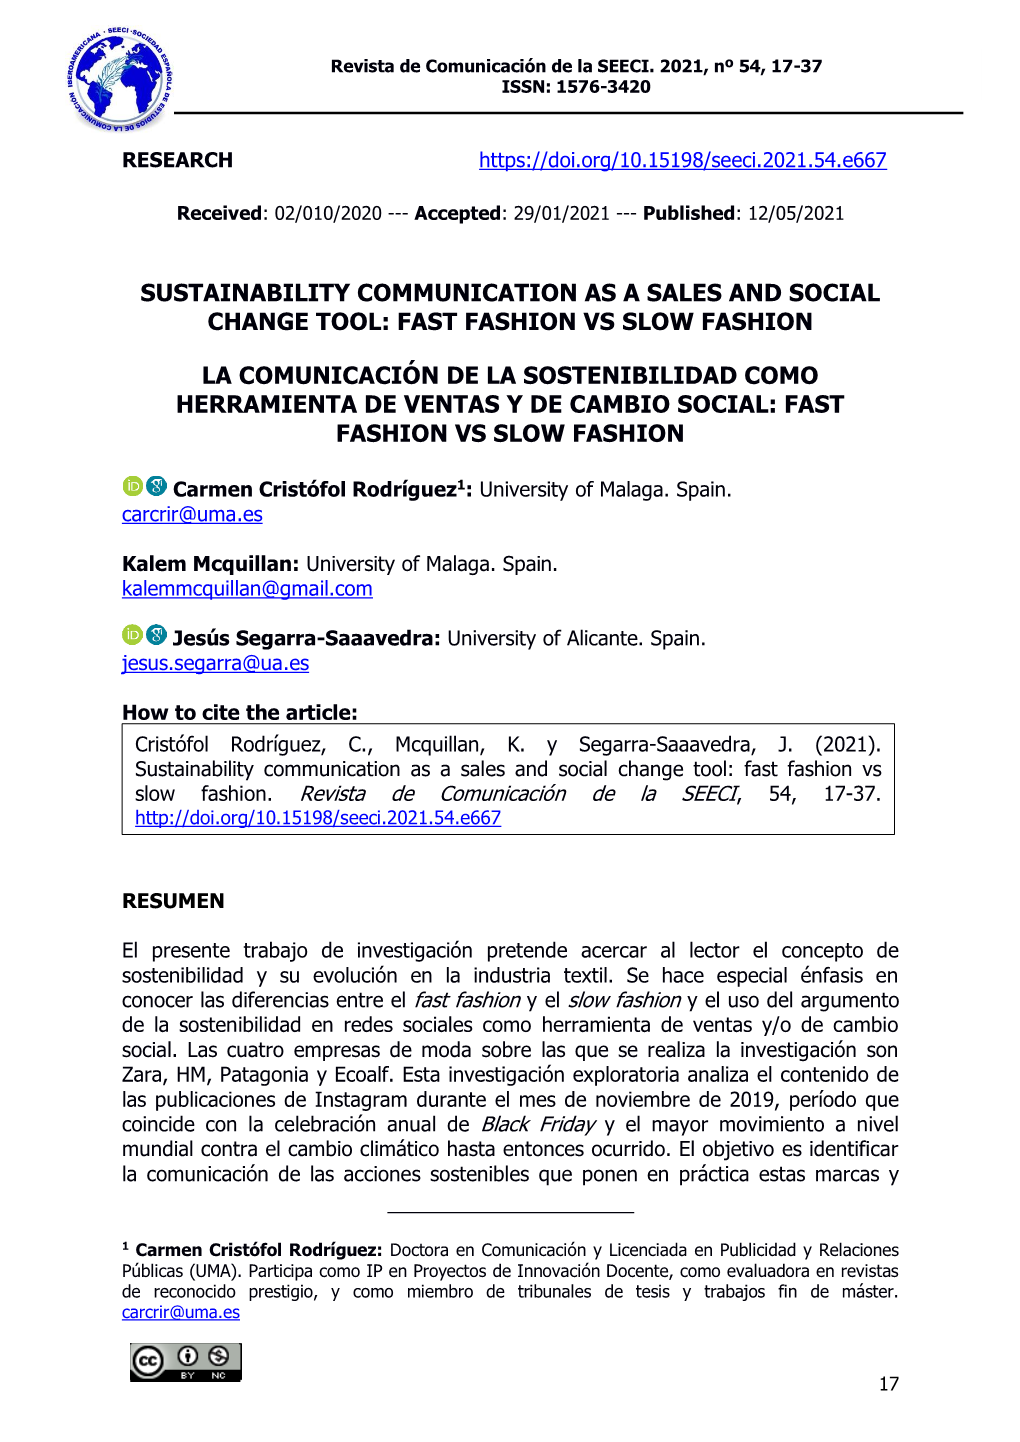 Sustainability Communication As a Sales and Social Change Tool: Fast Fashion Vs Slow Fashion